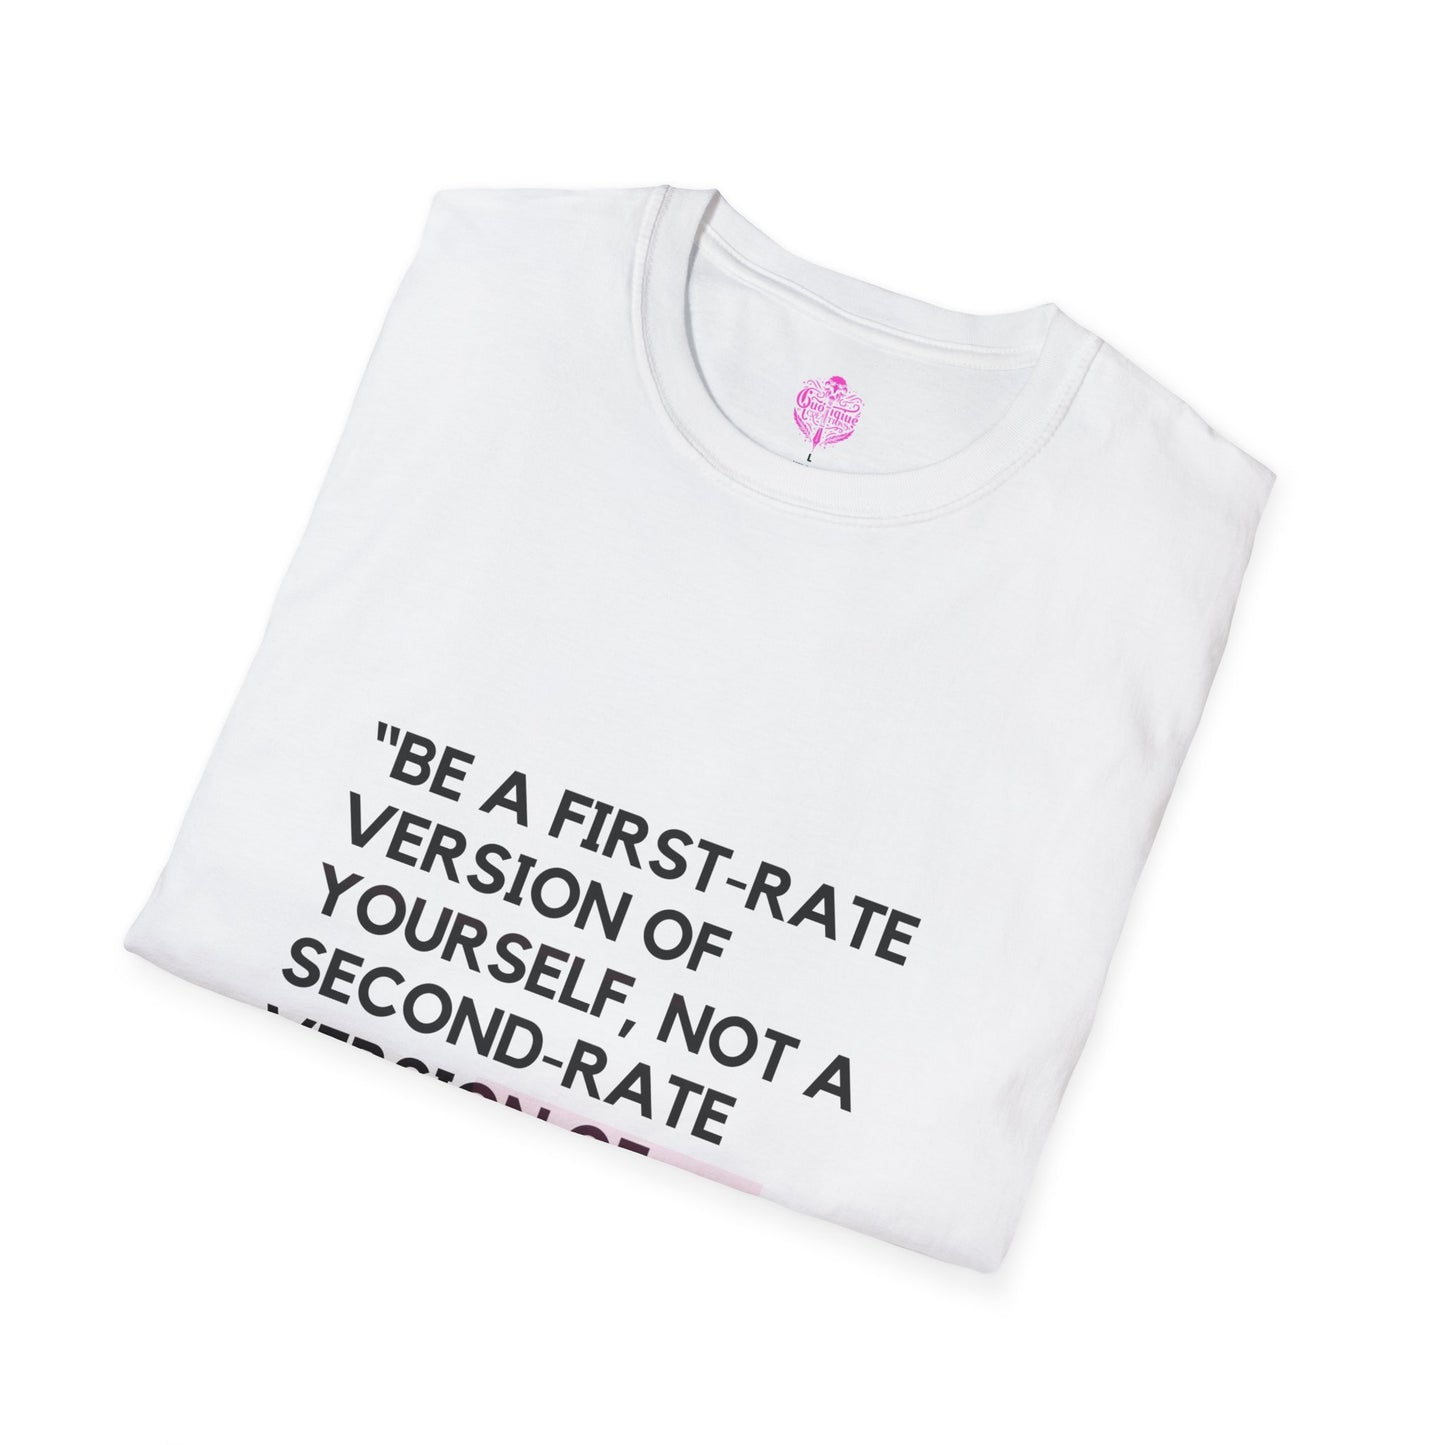 First rate version -T-Shirt